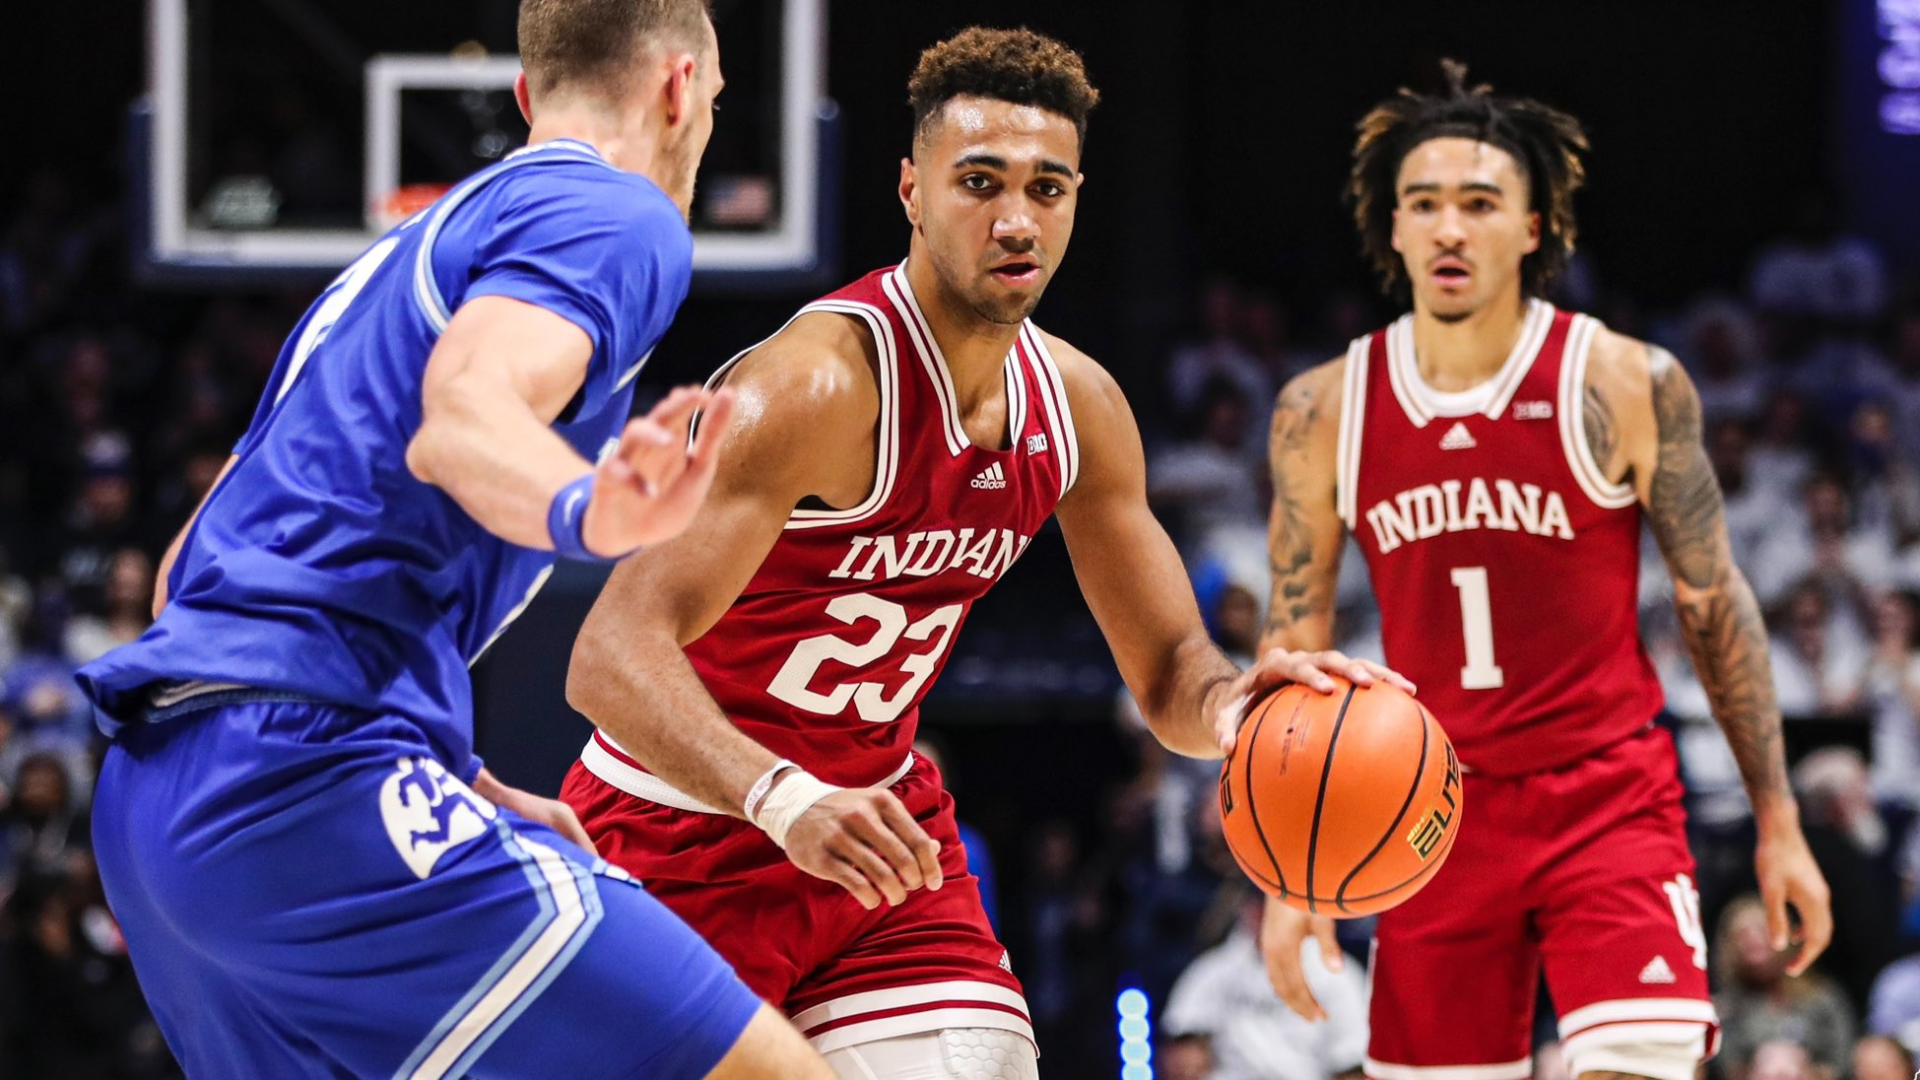 A look at the latest NBA Draft projections for Hood-Schifino and Jackson-Davis